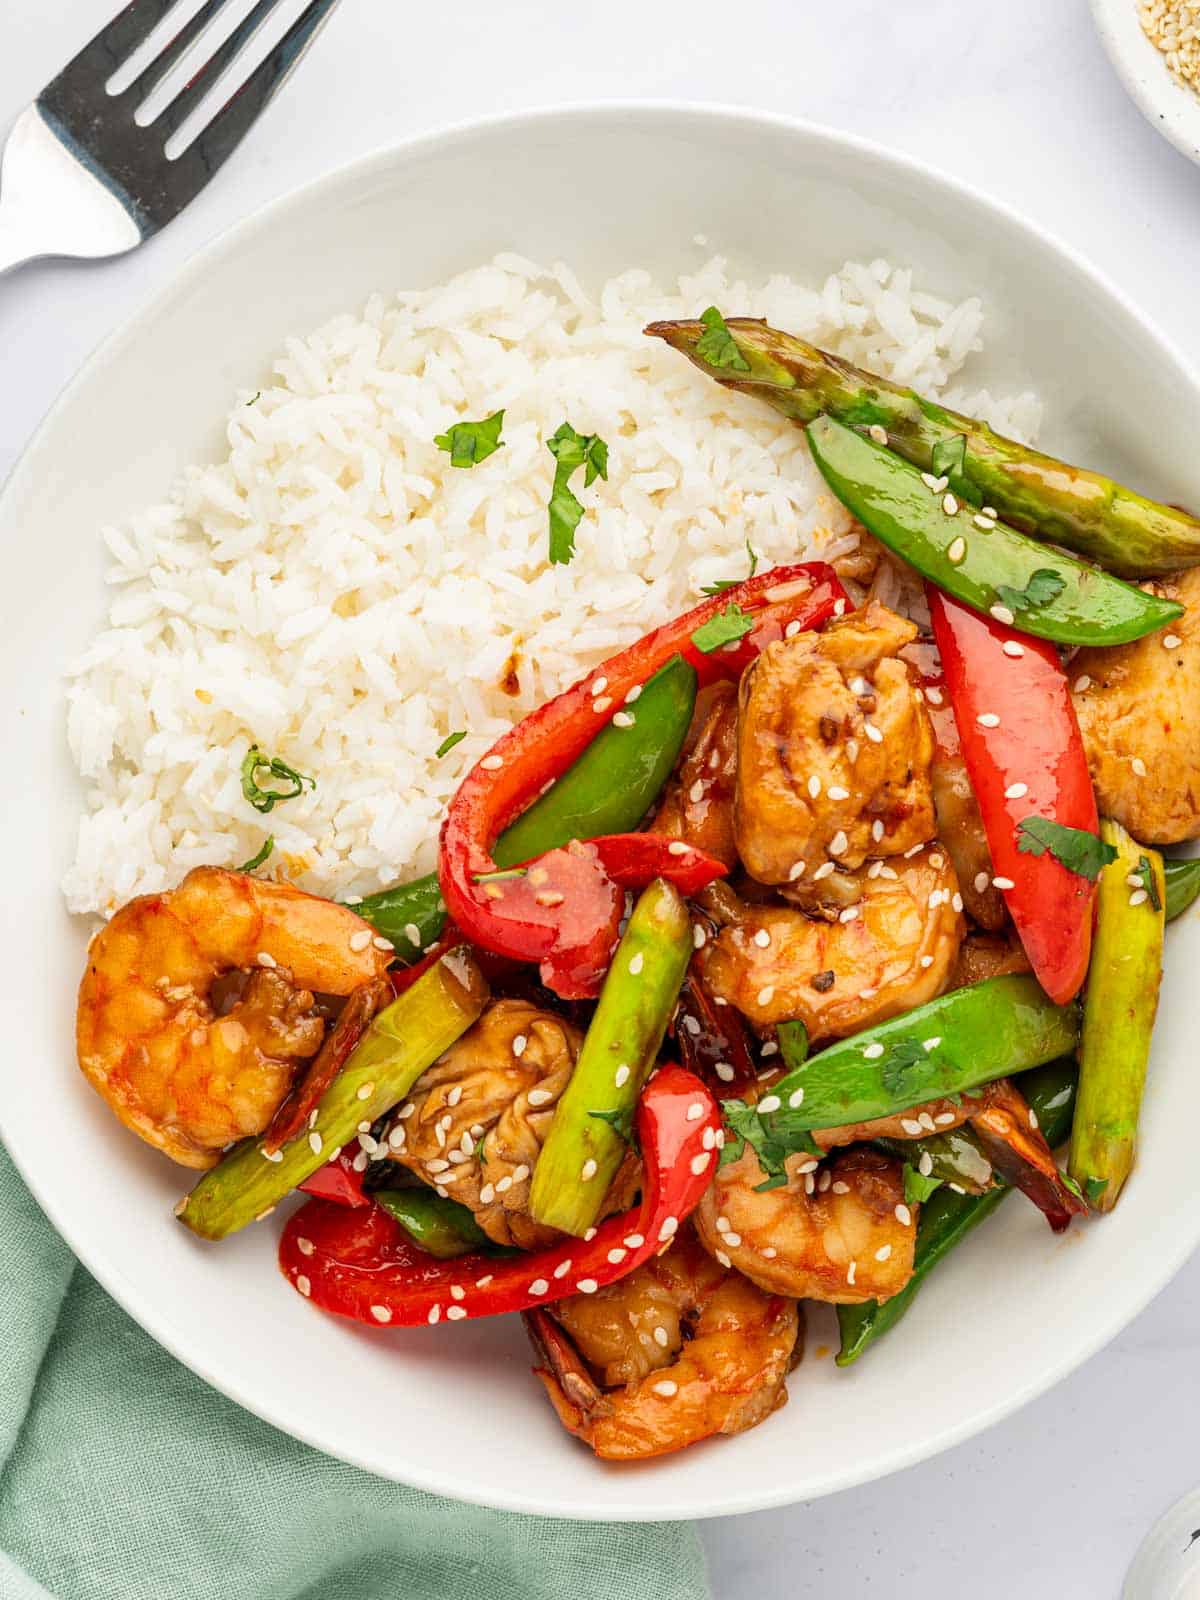 A plate of shrimp and chicken stir fry with rice.